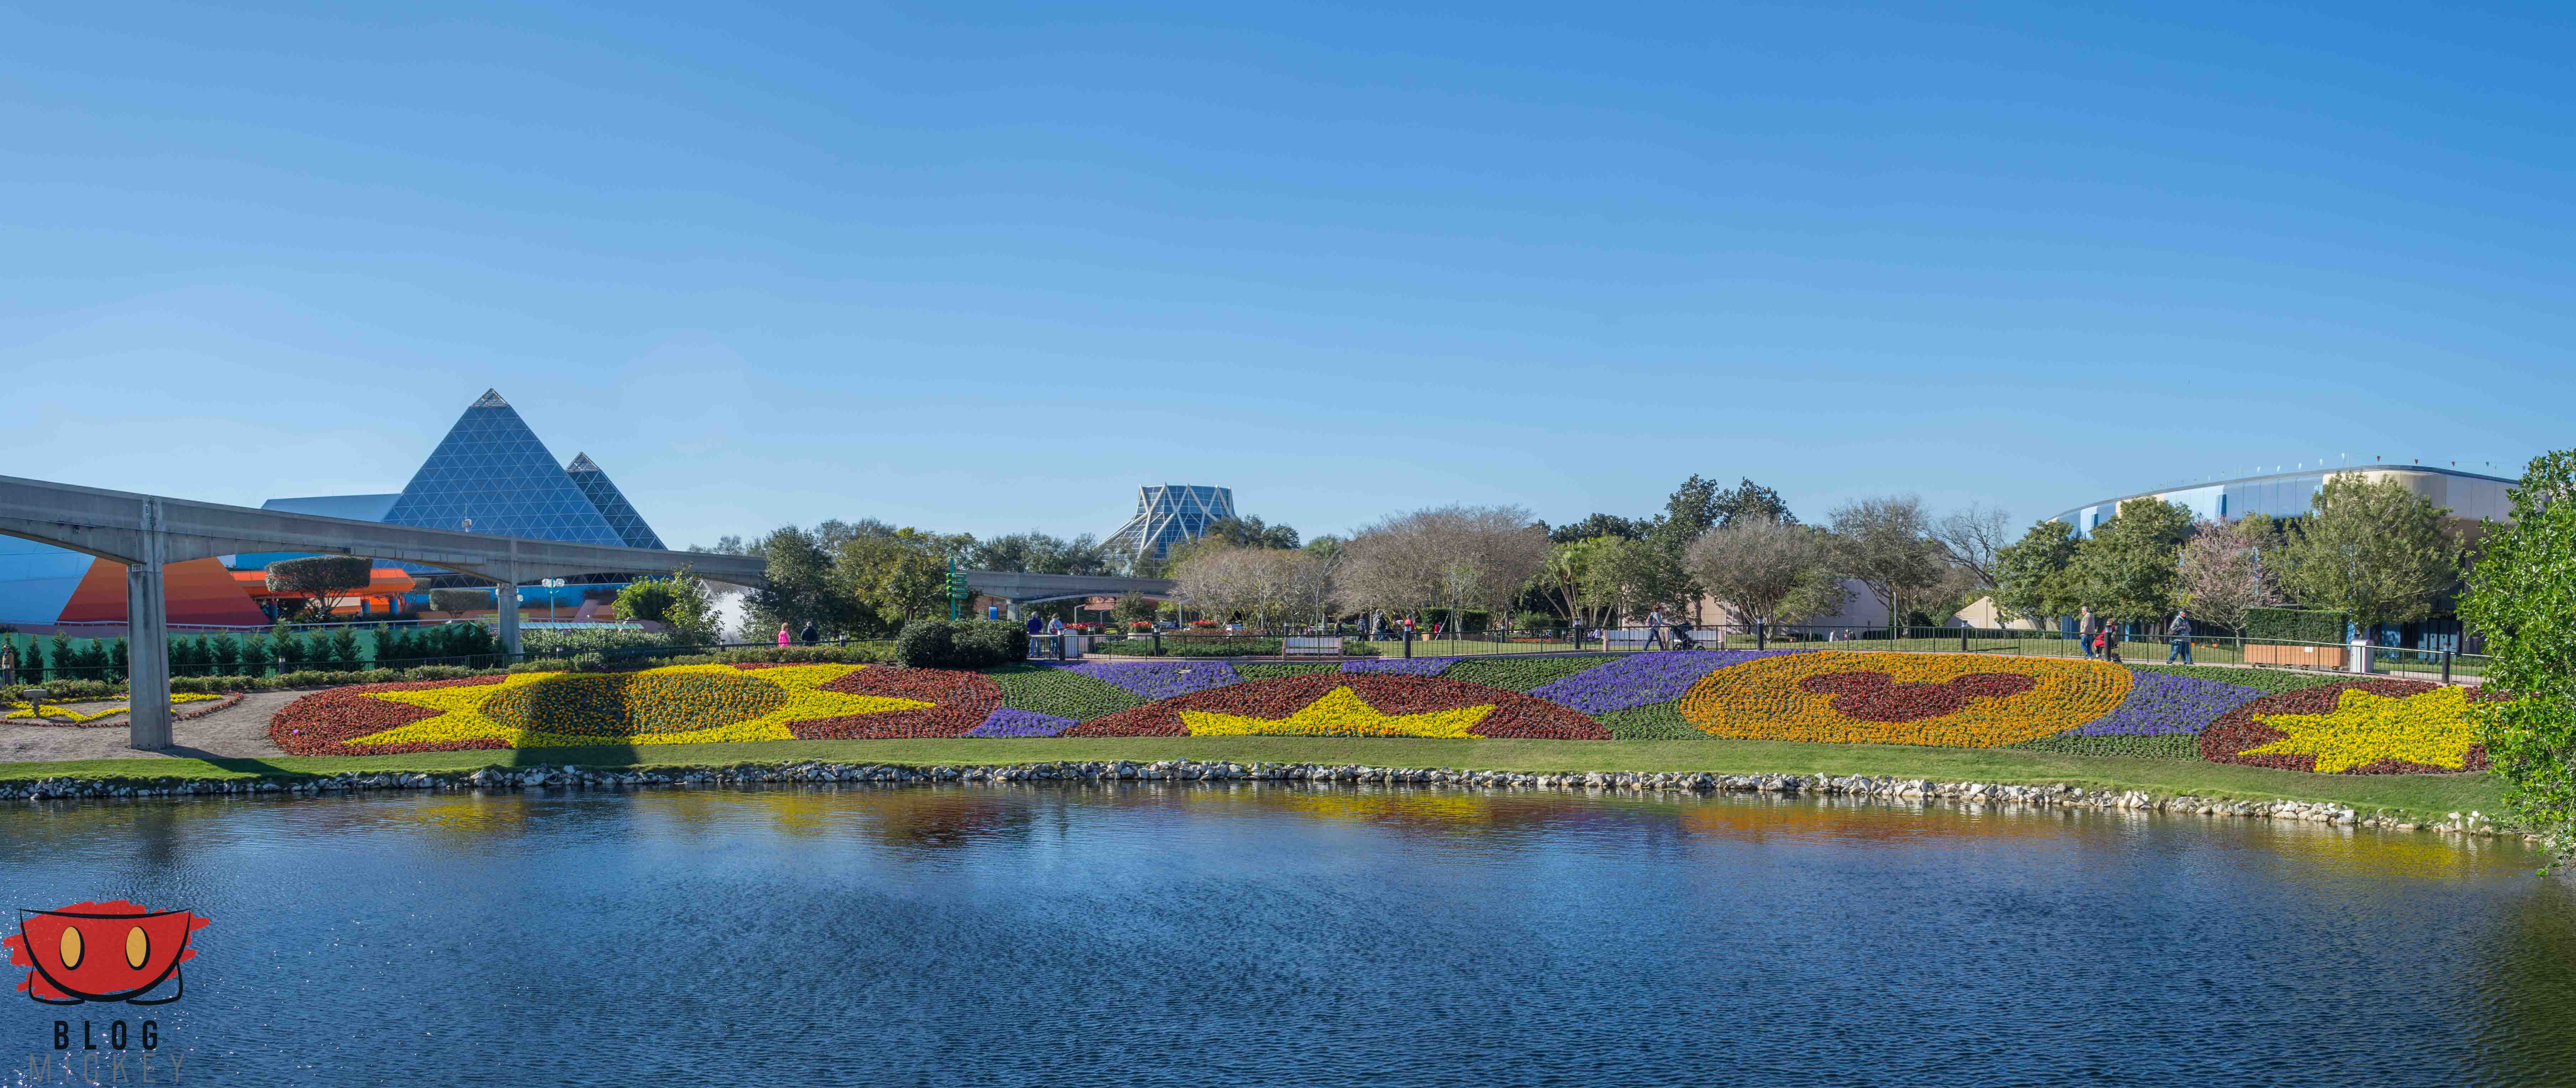 EpcotPhotoUpdate_02102016-34